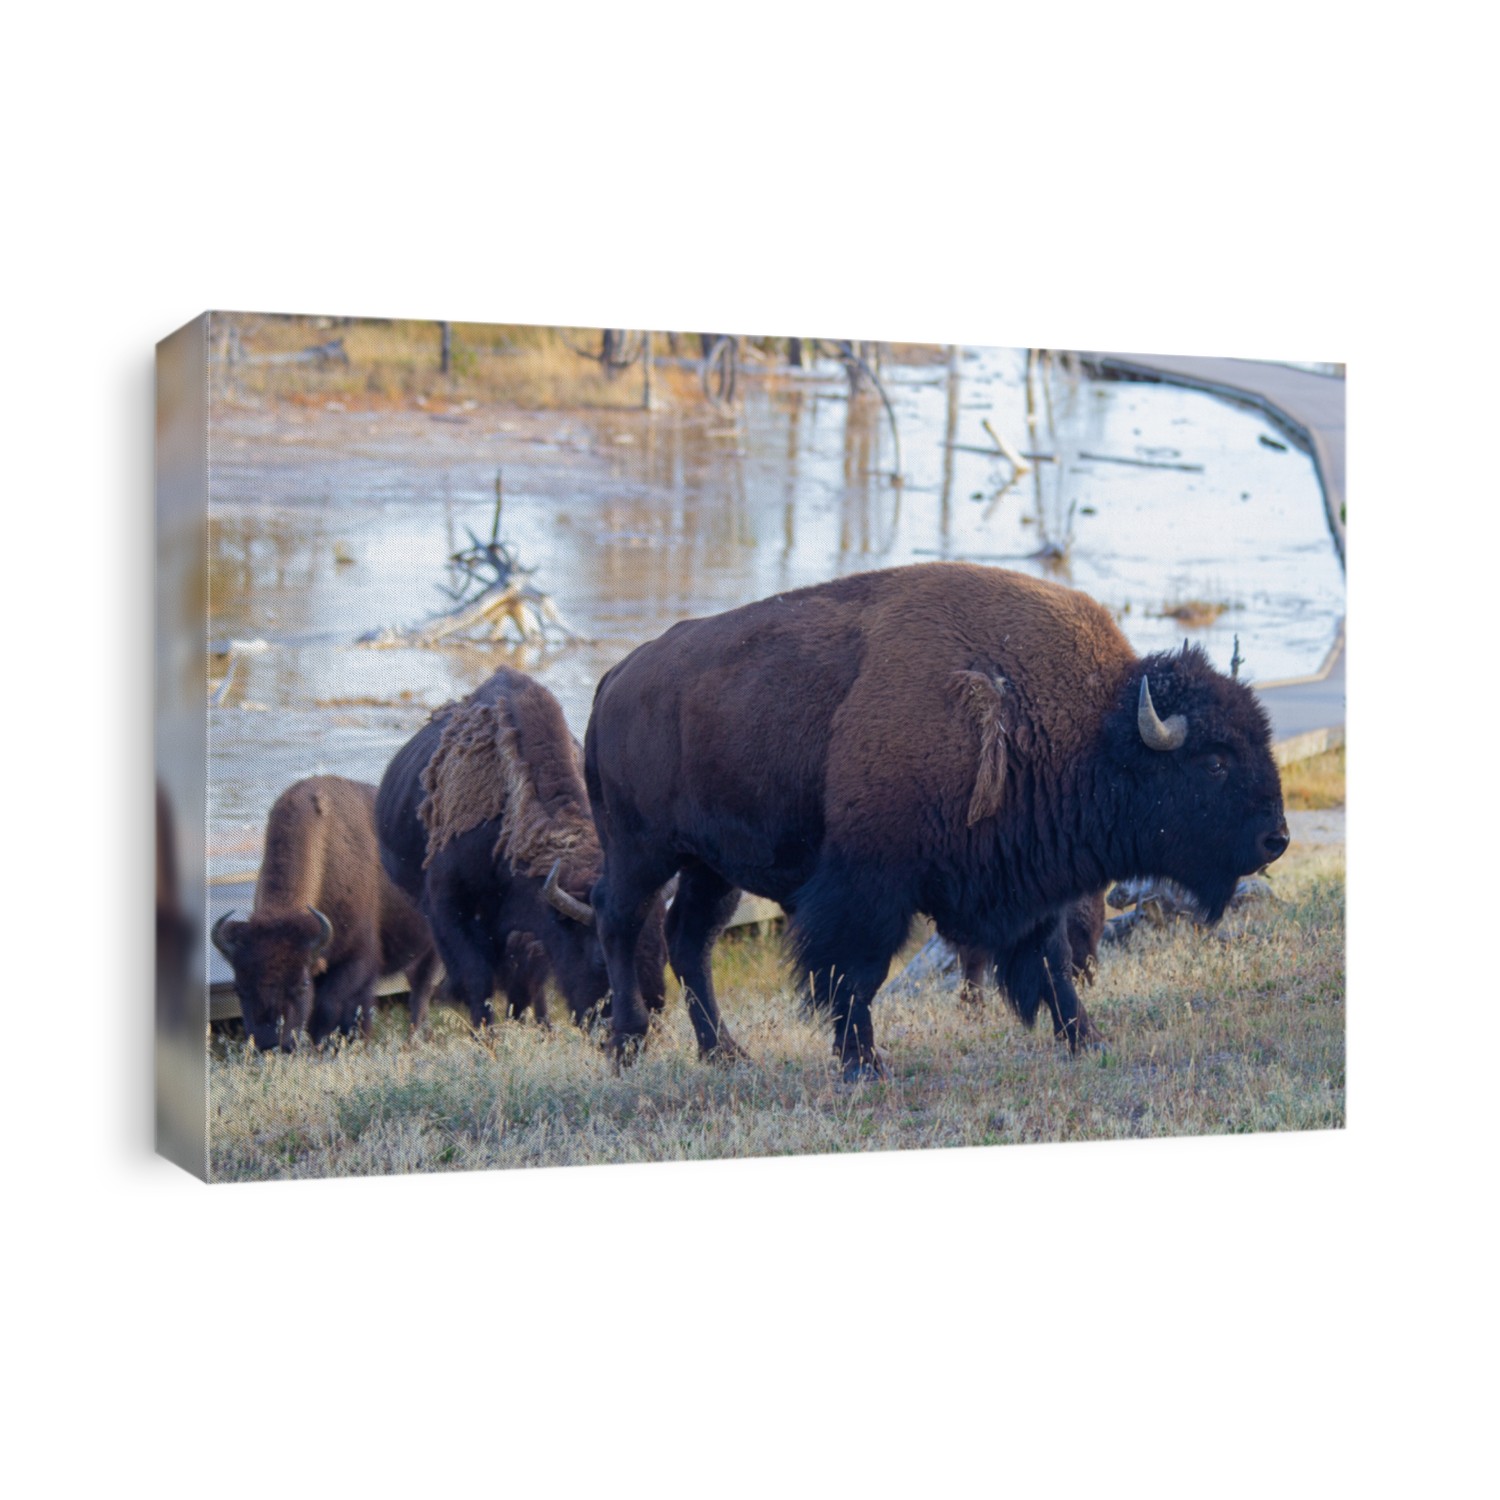 Bison in the Yellowstone national park, Wyoming, USA